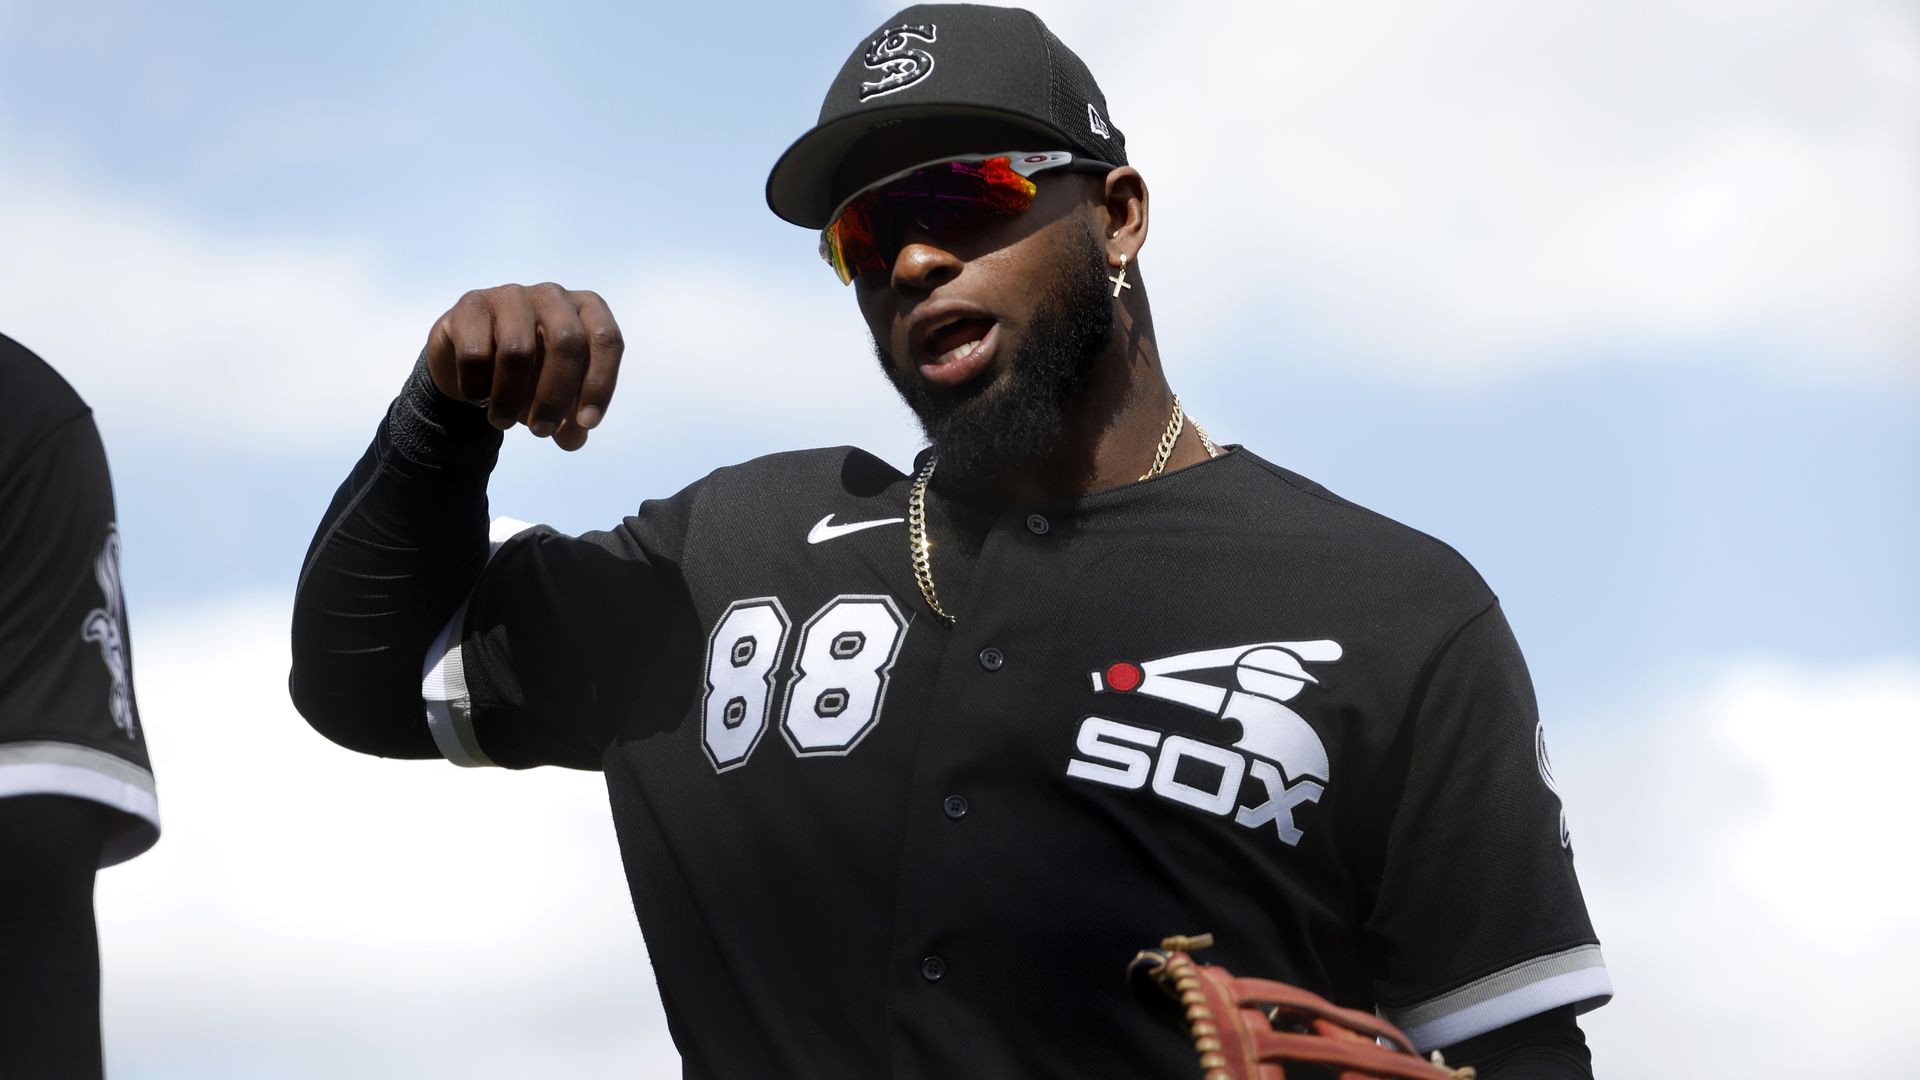 Cubs & White Sox: What to know about their start to spring